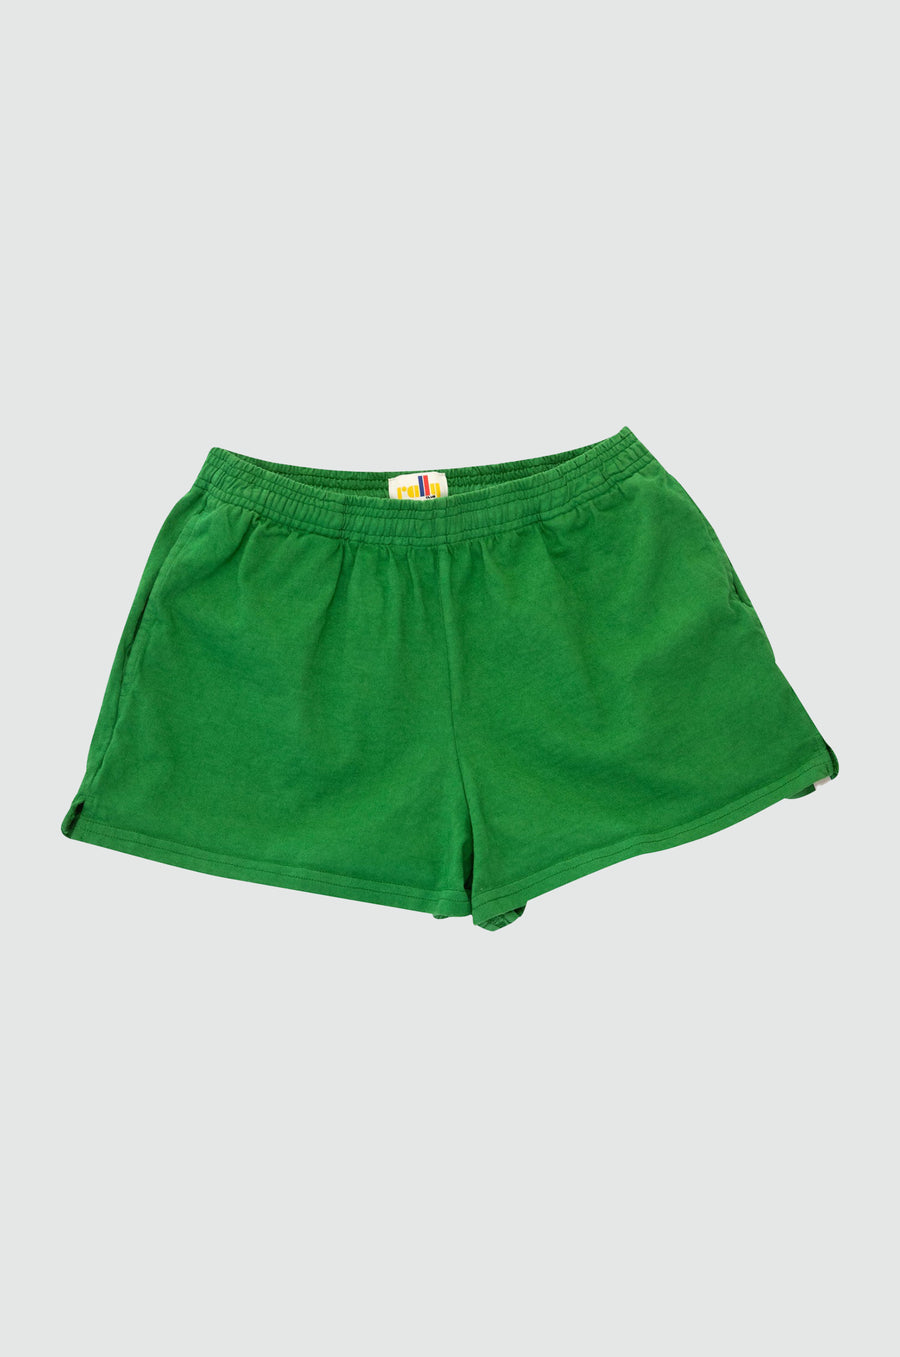 Chas Short in Green Front Flat View 2